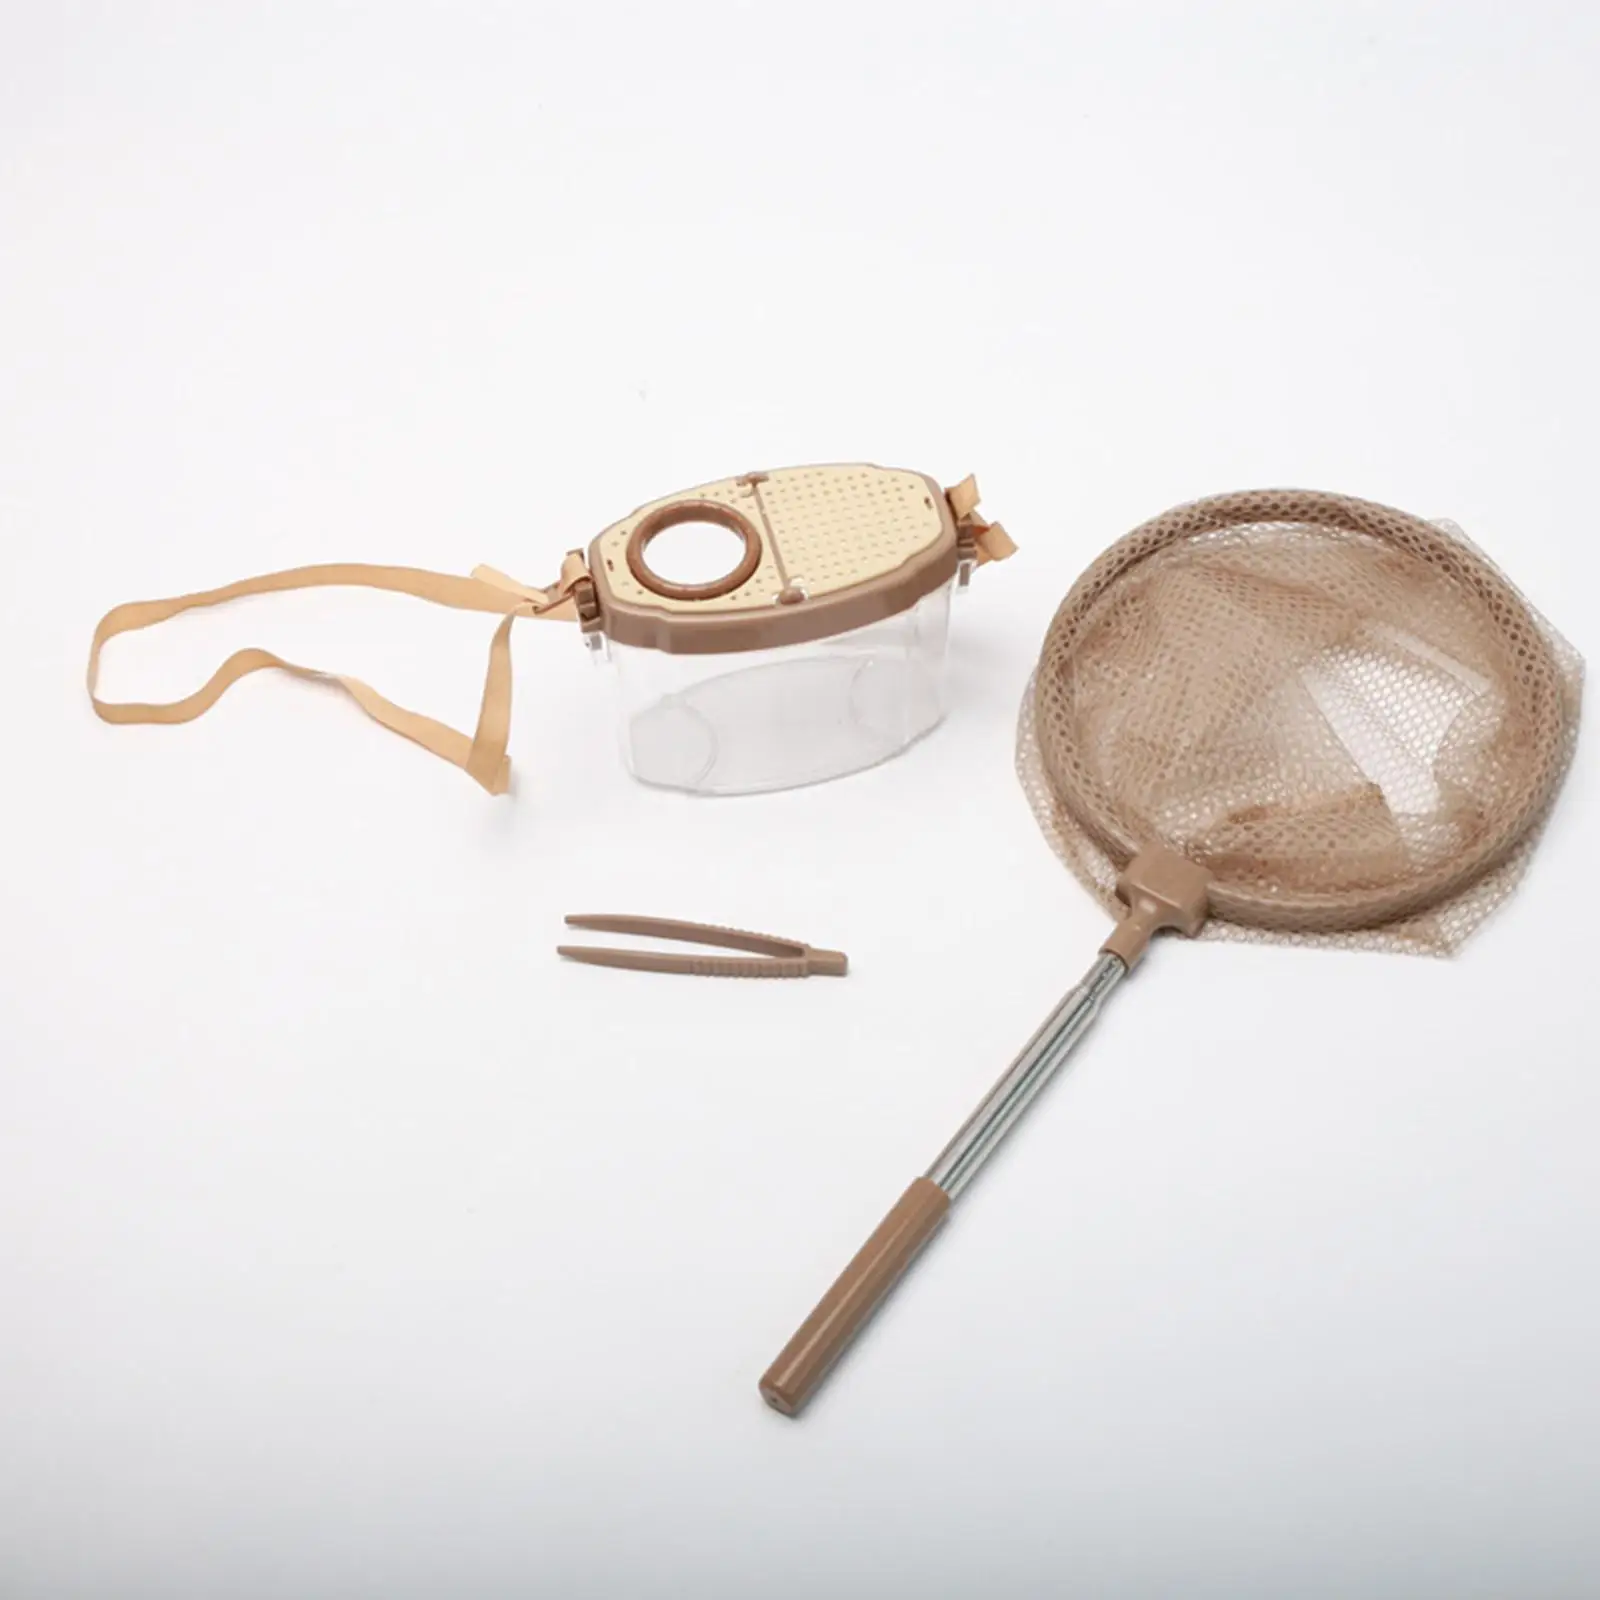 Bug Catcher Kit with Magnifying Glass Observing Learning Discovering Explorating explorer Kit for Collecting Kids